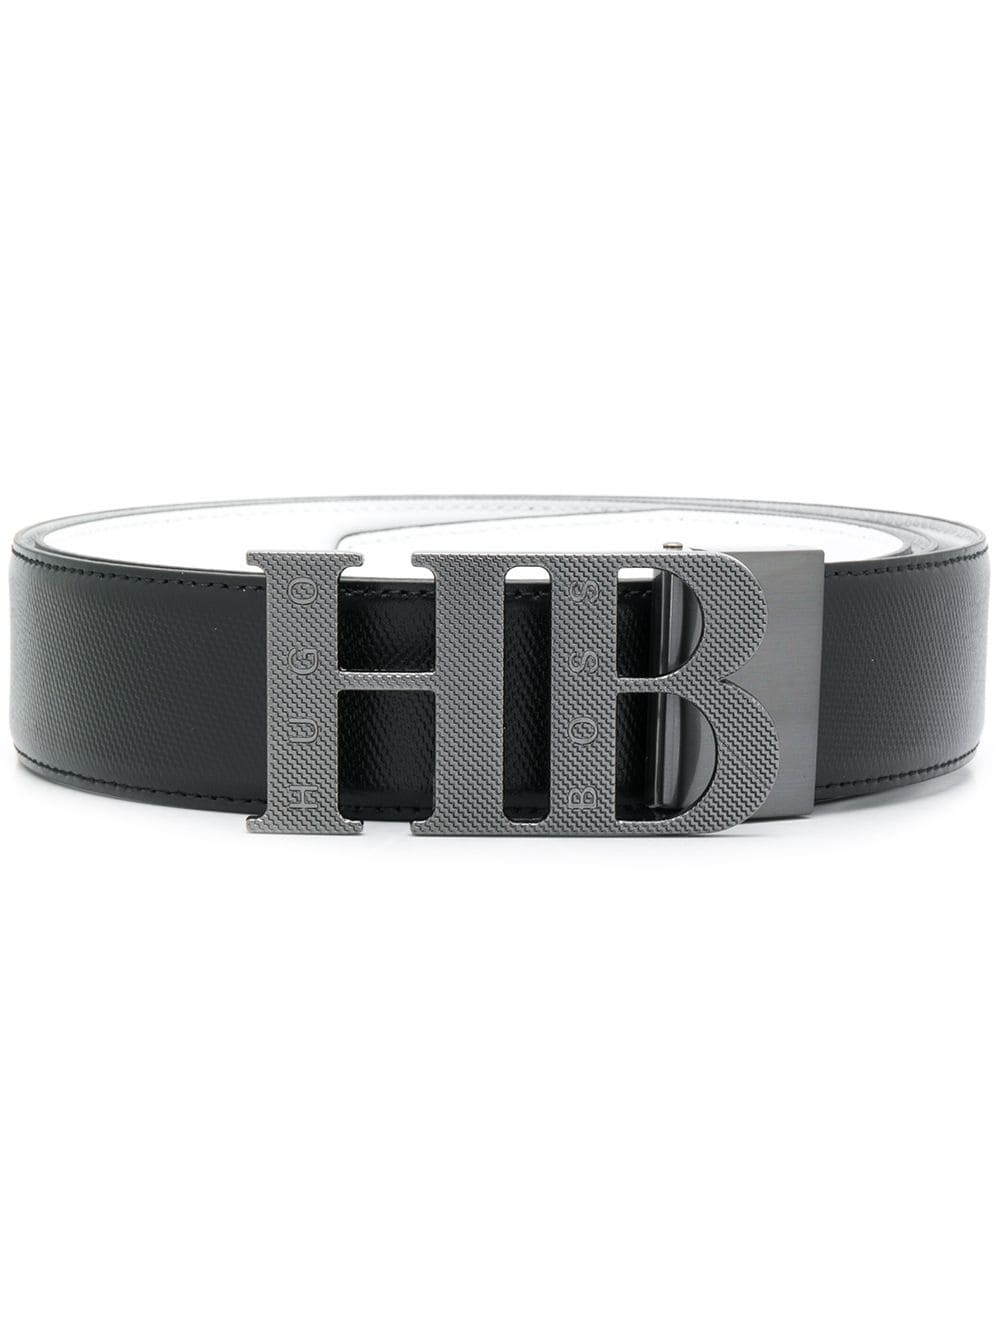 BOSS Reversible leather belt with milled monogram buckle Black